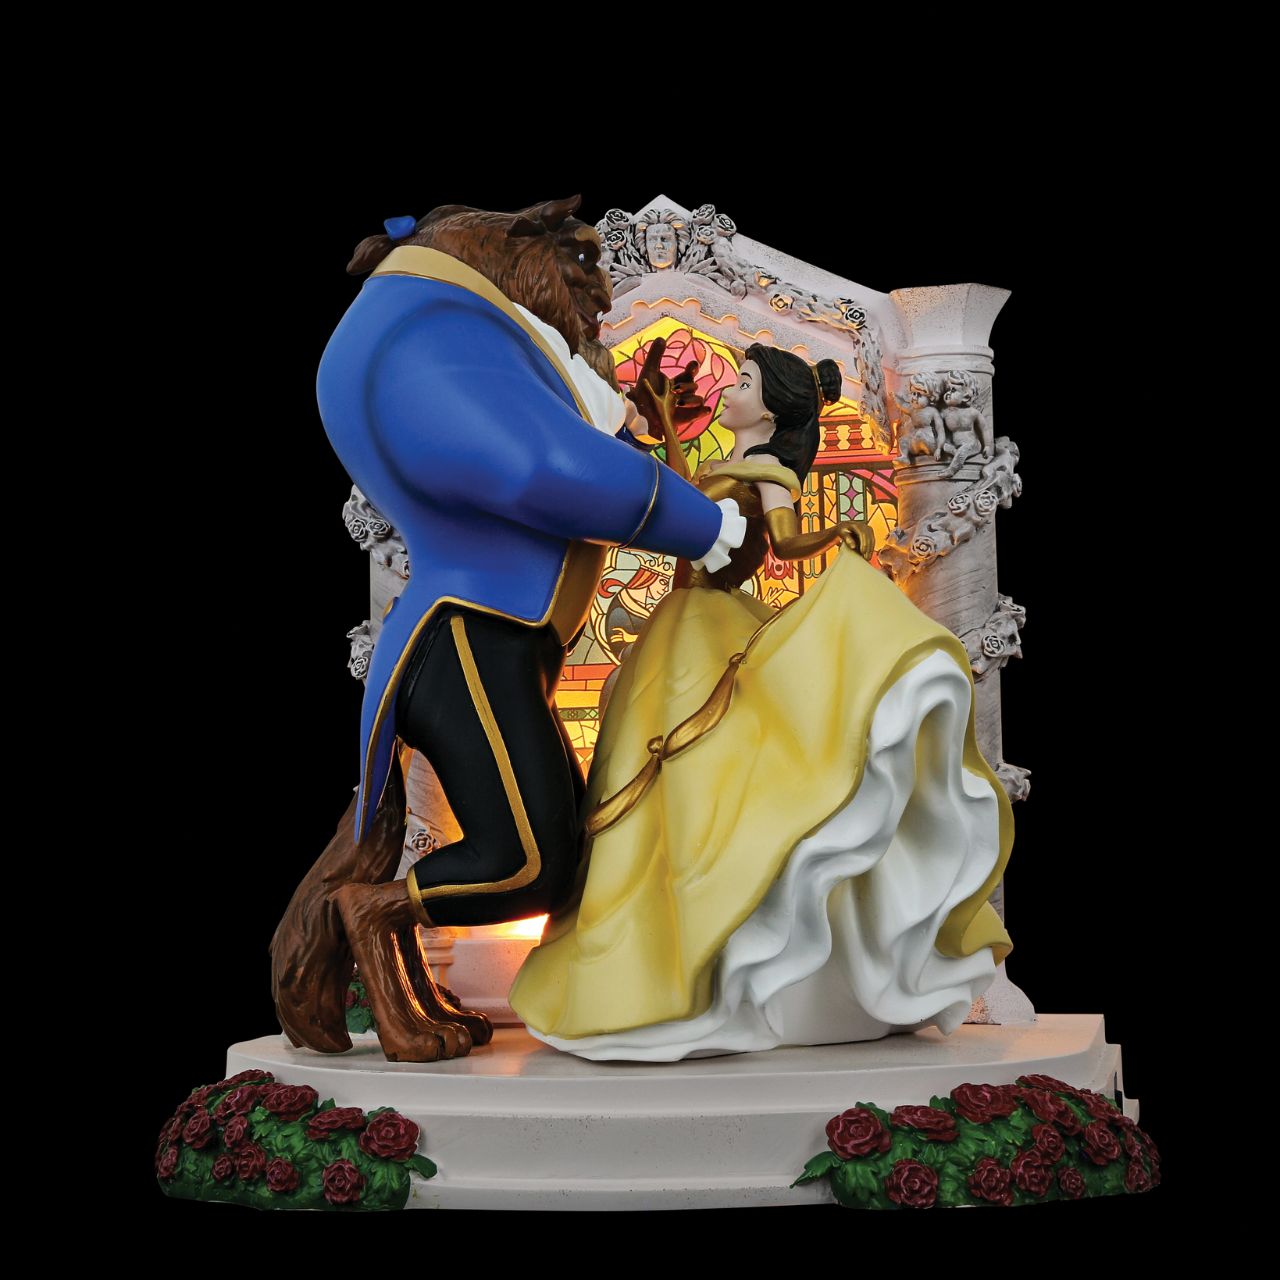 Disney Showcase Collection Beauty and the Beast Figurine  Beauty and the Beast light up figurine. The figurine is made from cast stone. Each piece is hand painted and slight colour variations are to be expected which makes each piece unique. Supplied in branded gift box.